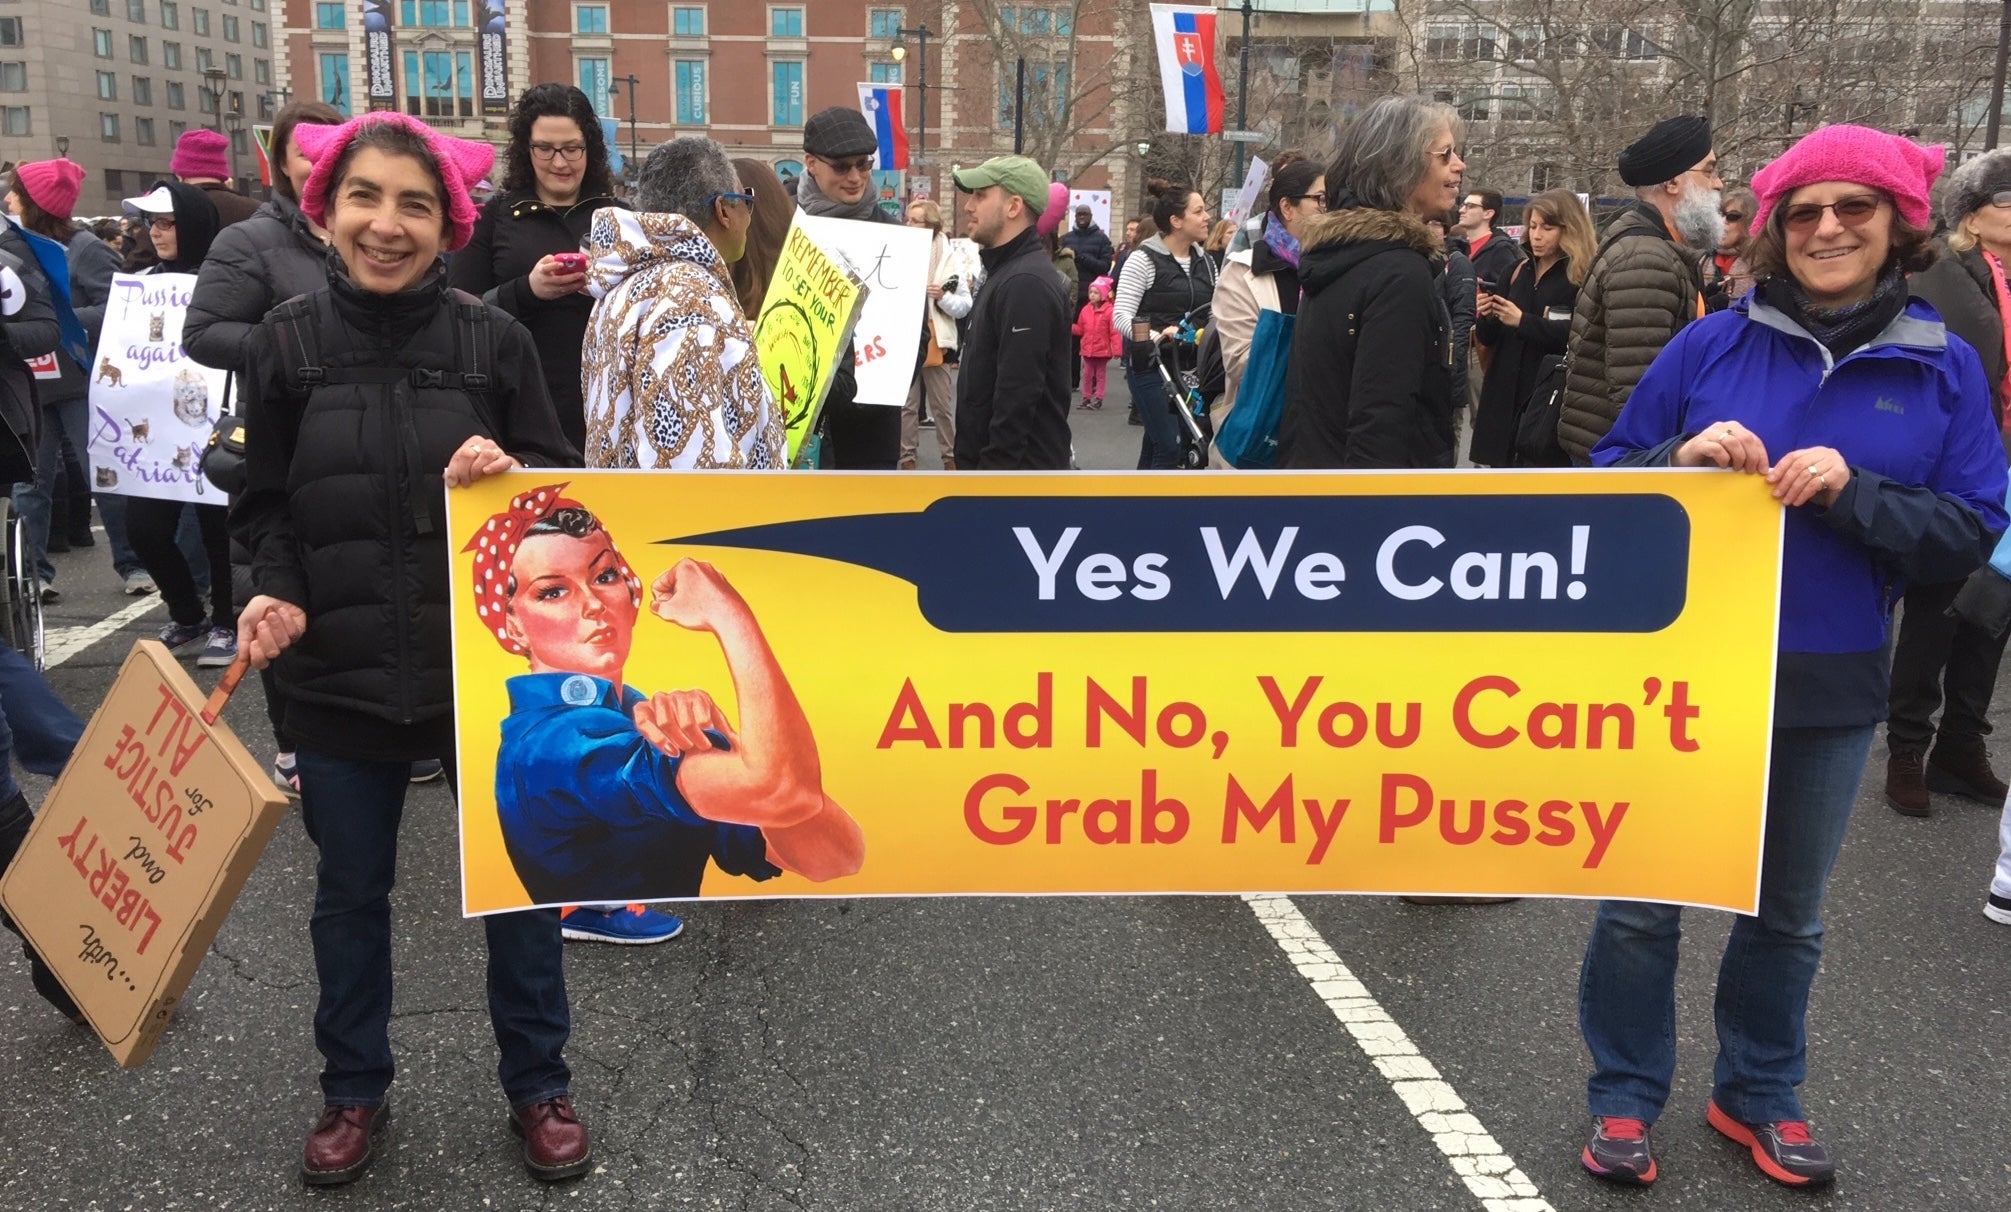 The author (left) is shown holding a sign with her partner Elissa Goldberg. (Image courtesy of Anndee Hochman)